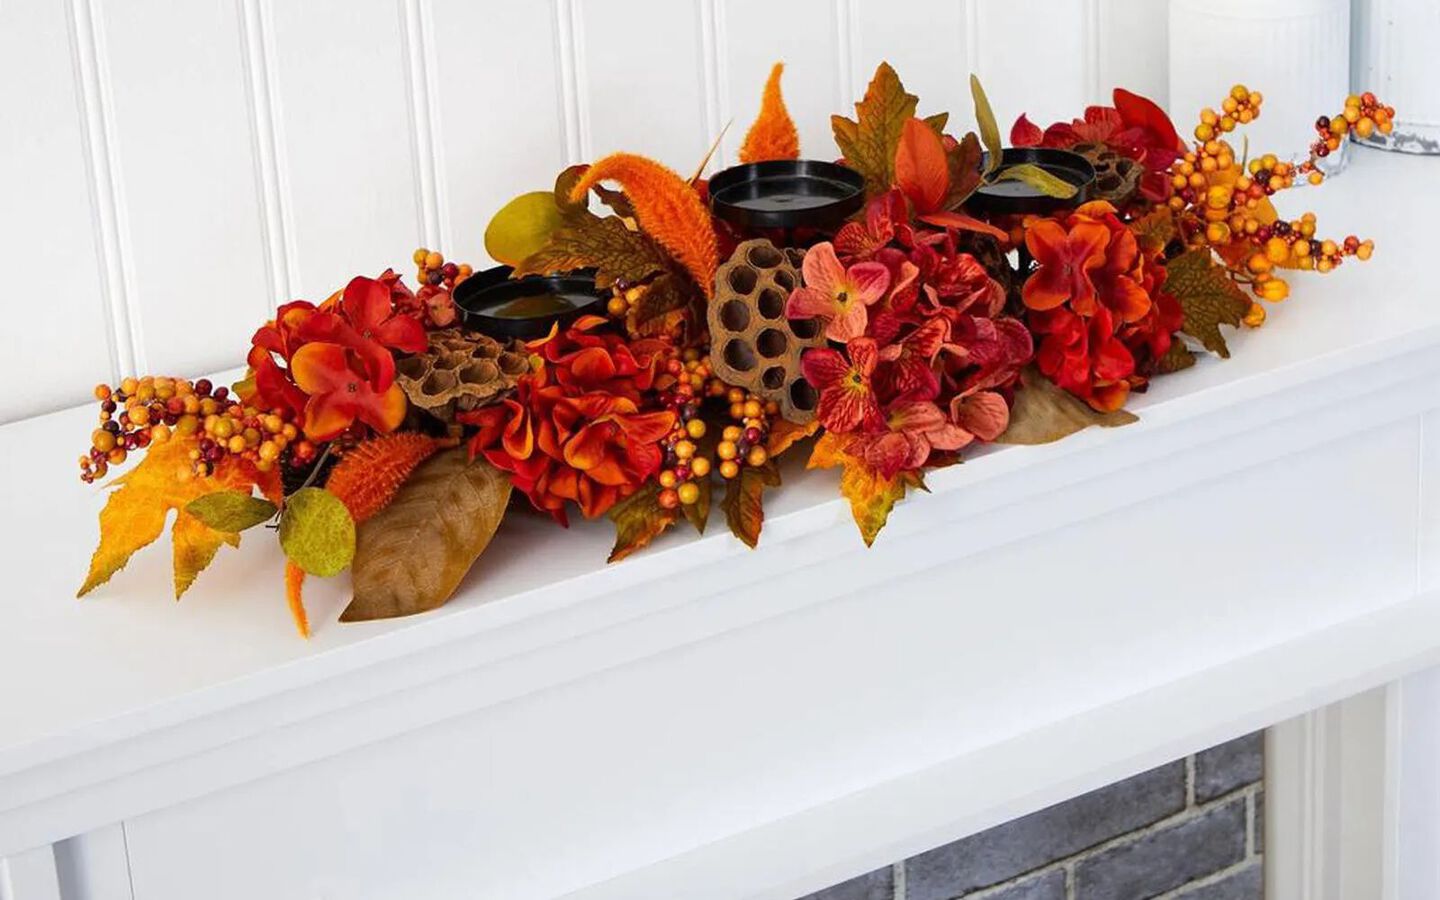 White fireplace mantel with decorative orange, yellow, and red leaf candle holder